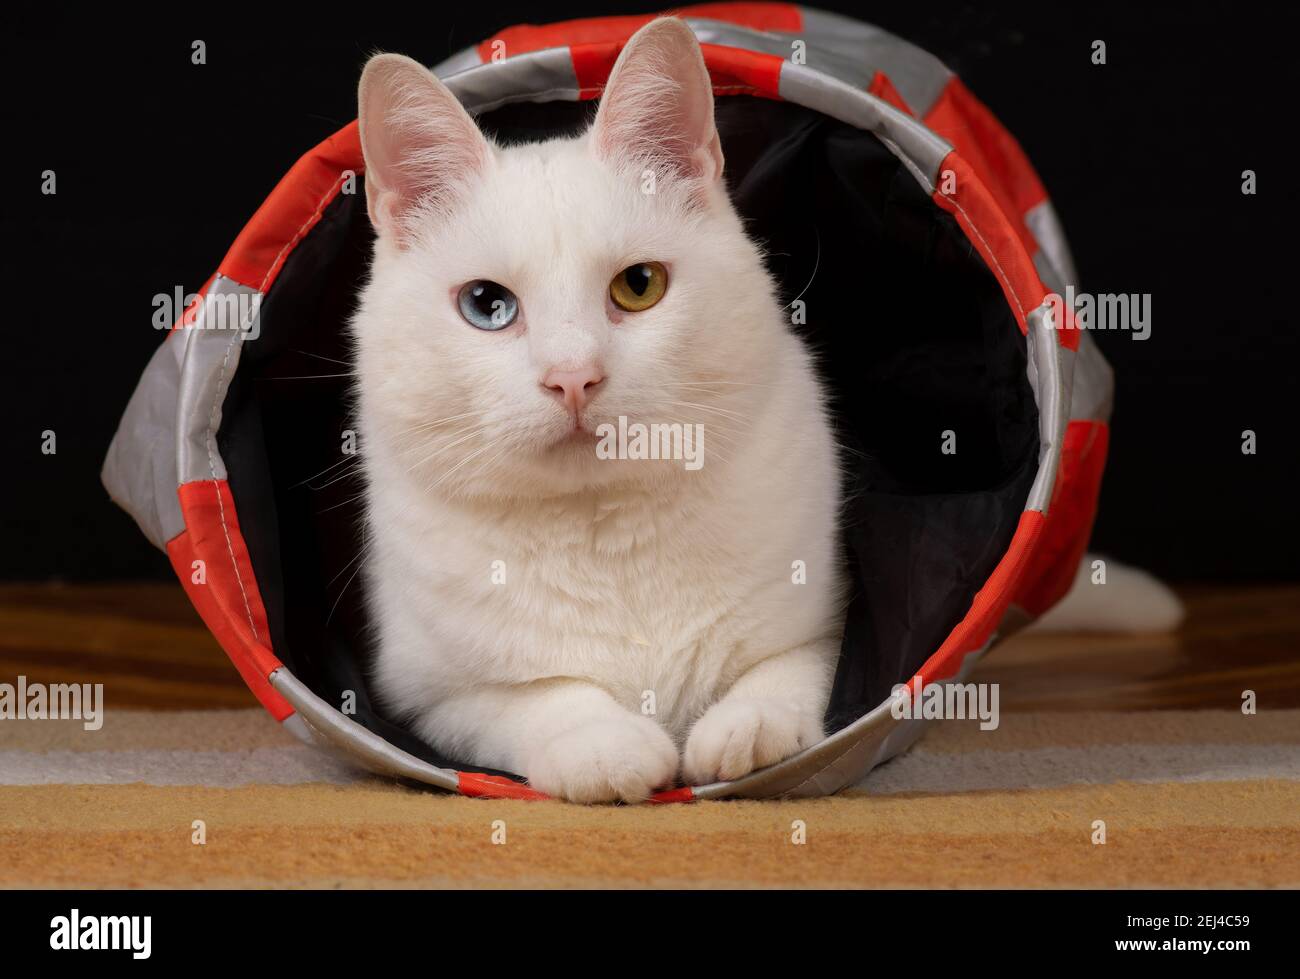 Adorable young tomcat is lying in his cat toy tunnel. He has a complete heterochromia iridis, a variation in coloration of irises. Stock Photo